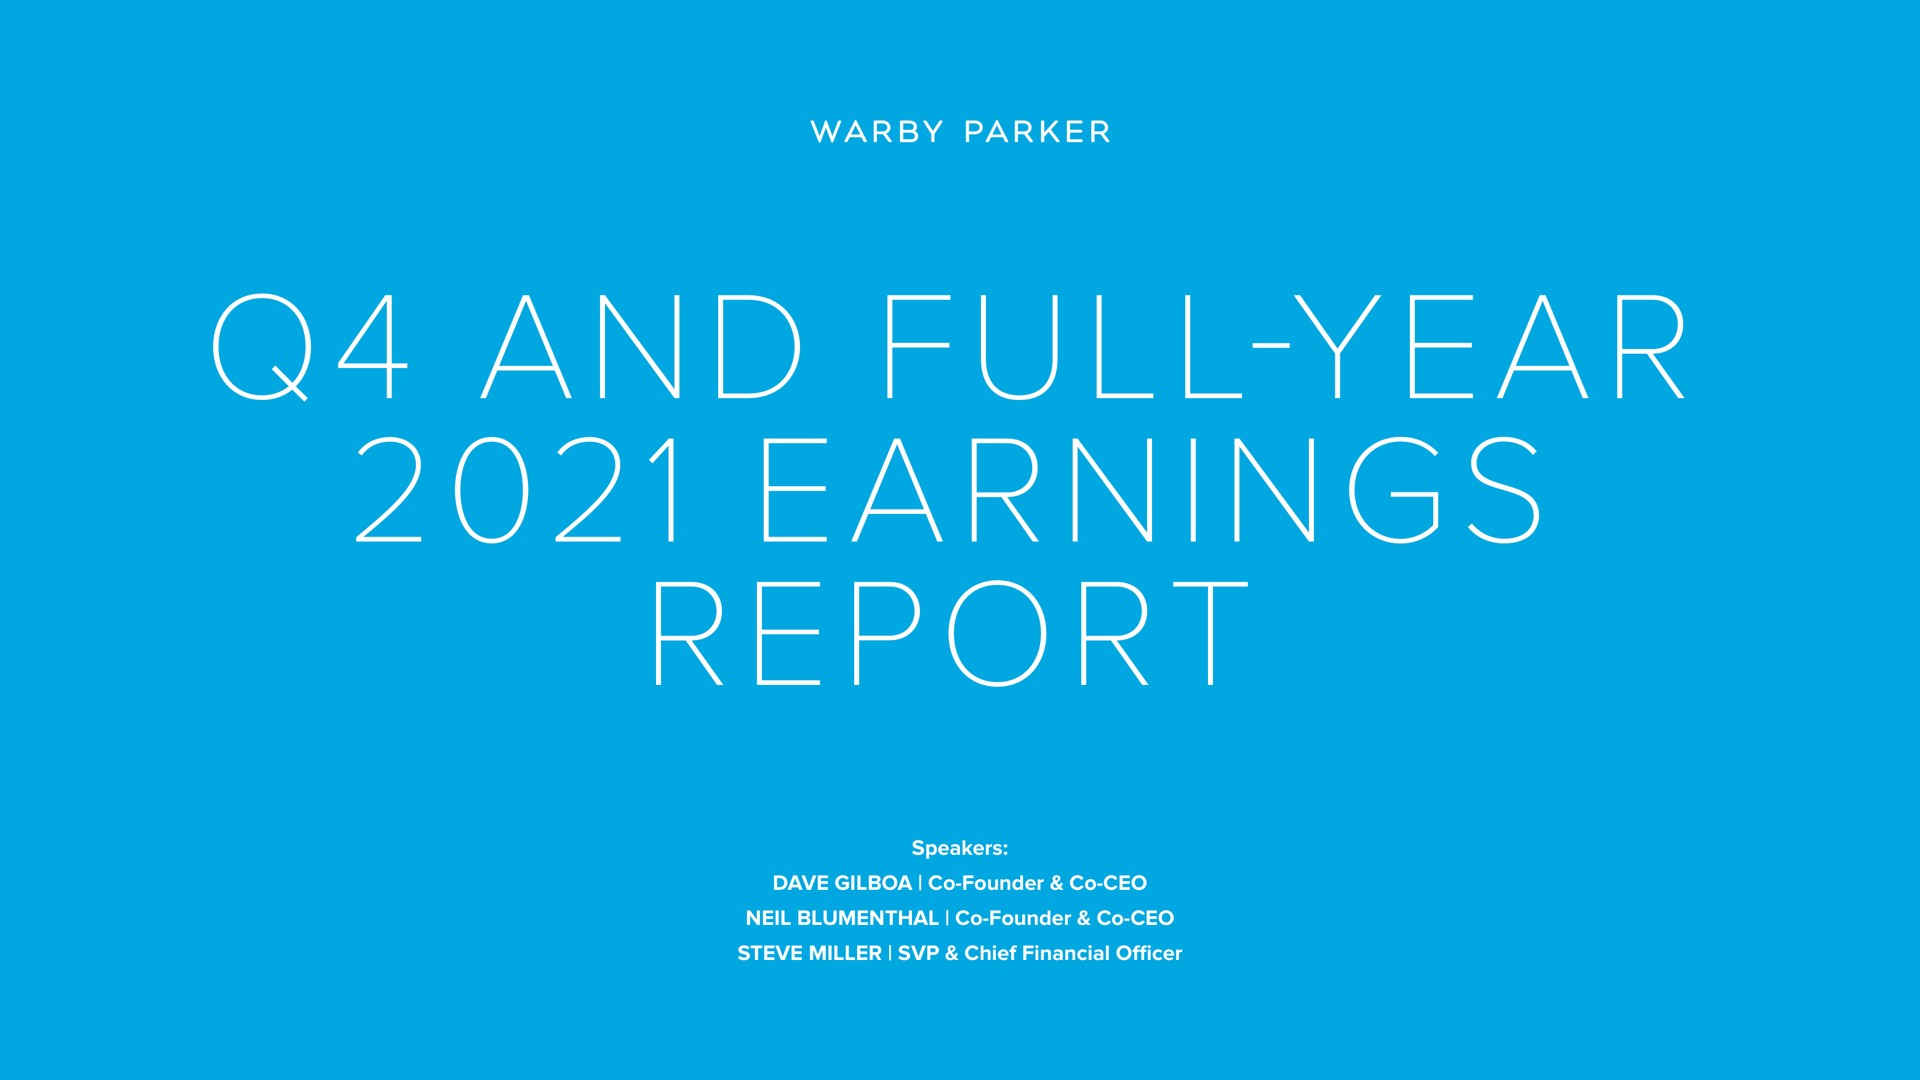 and full year earnings report parker | Warby Parker